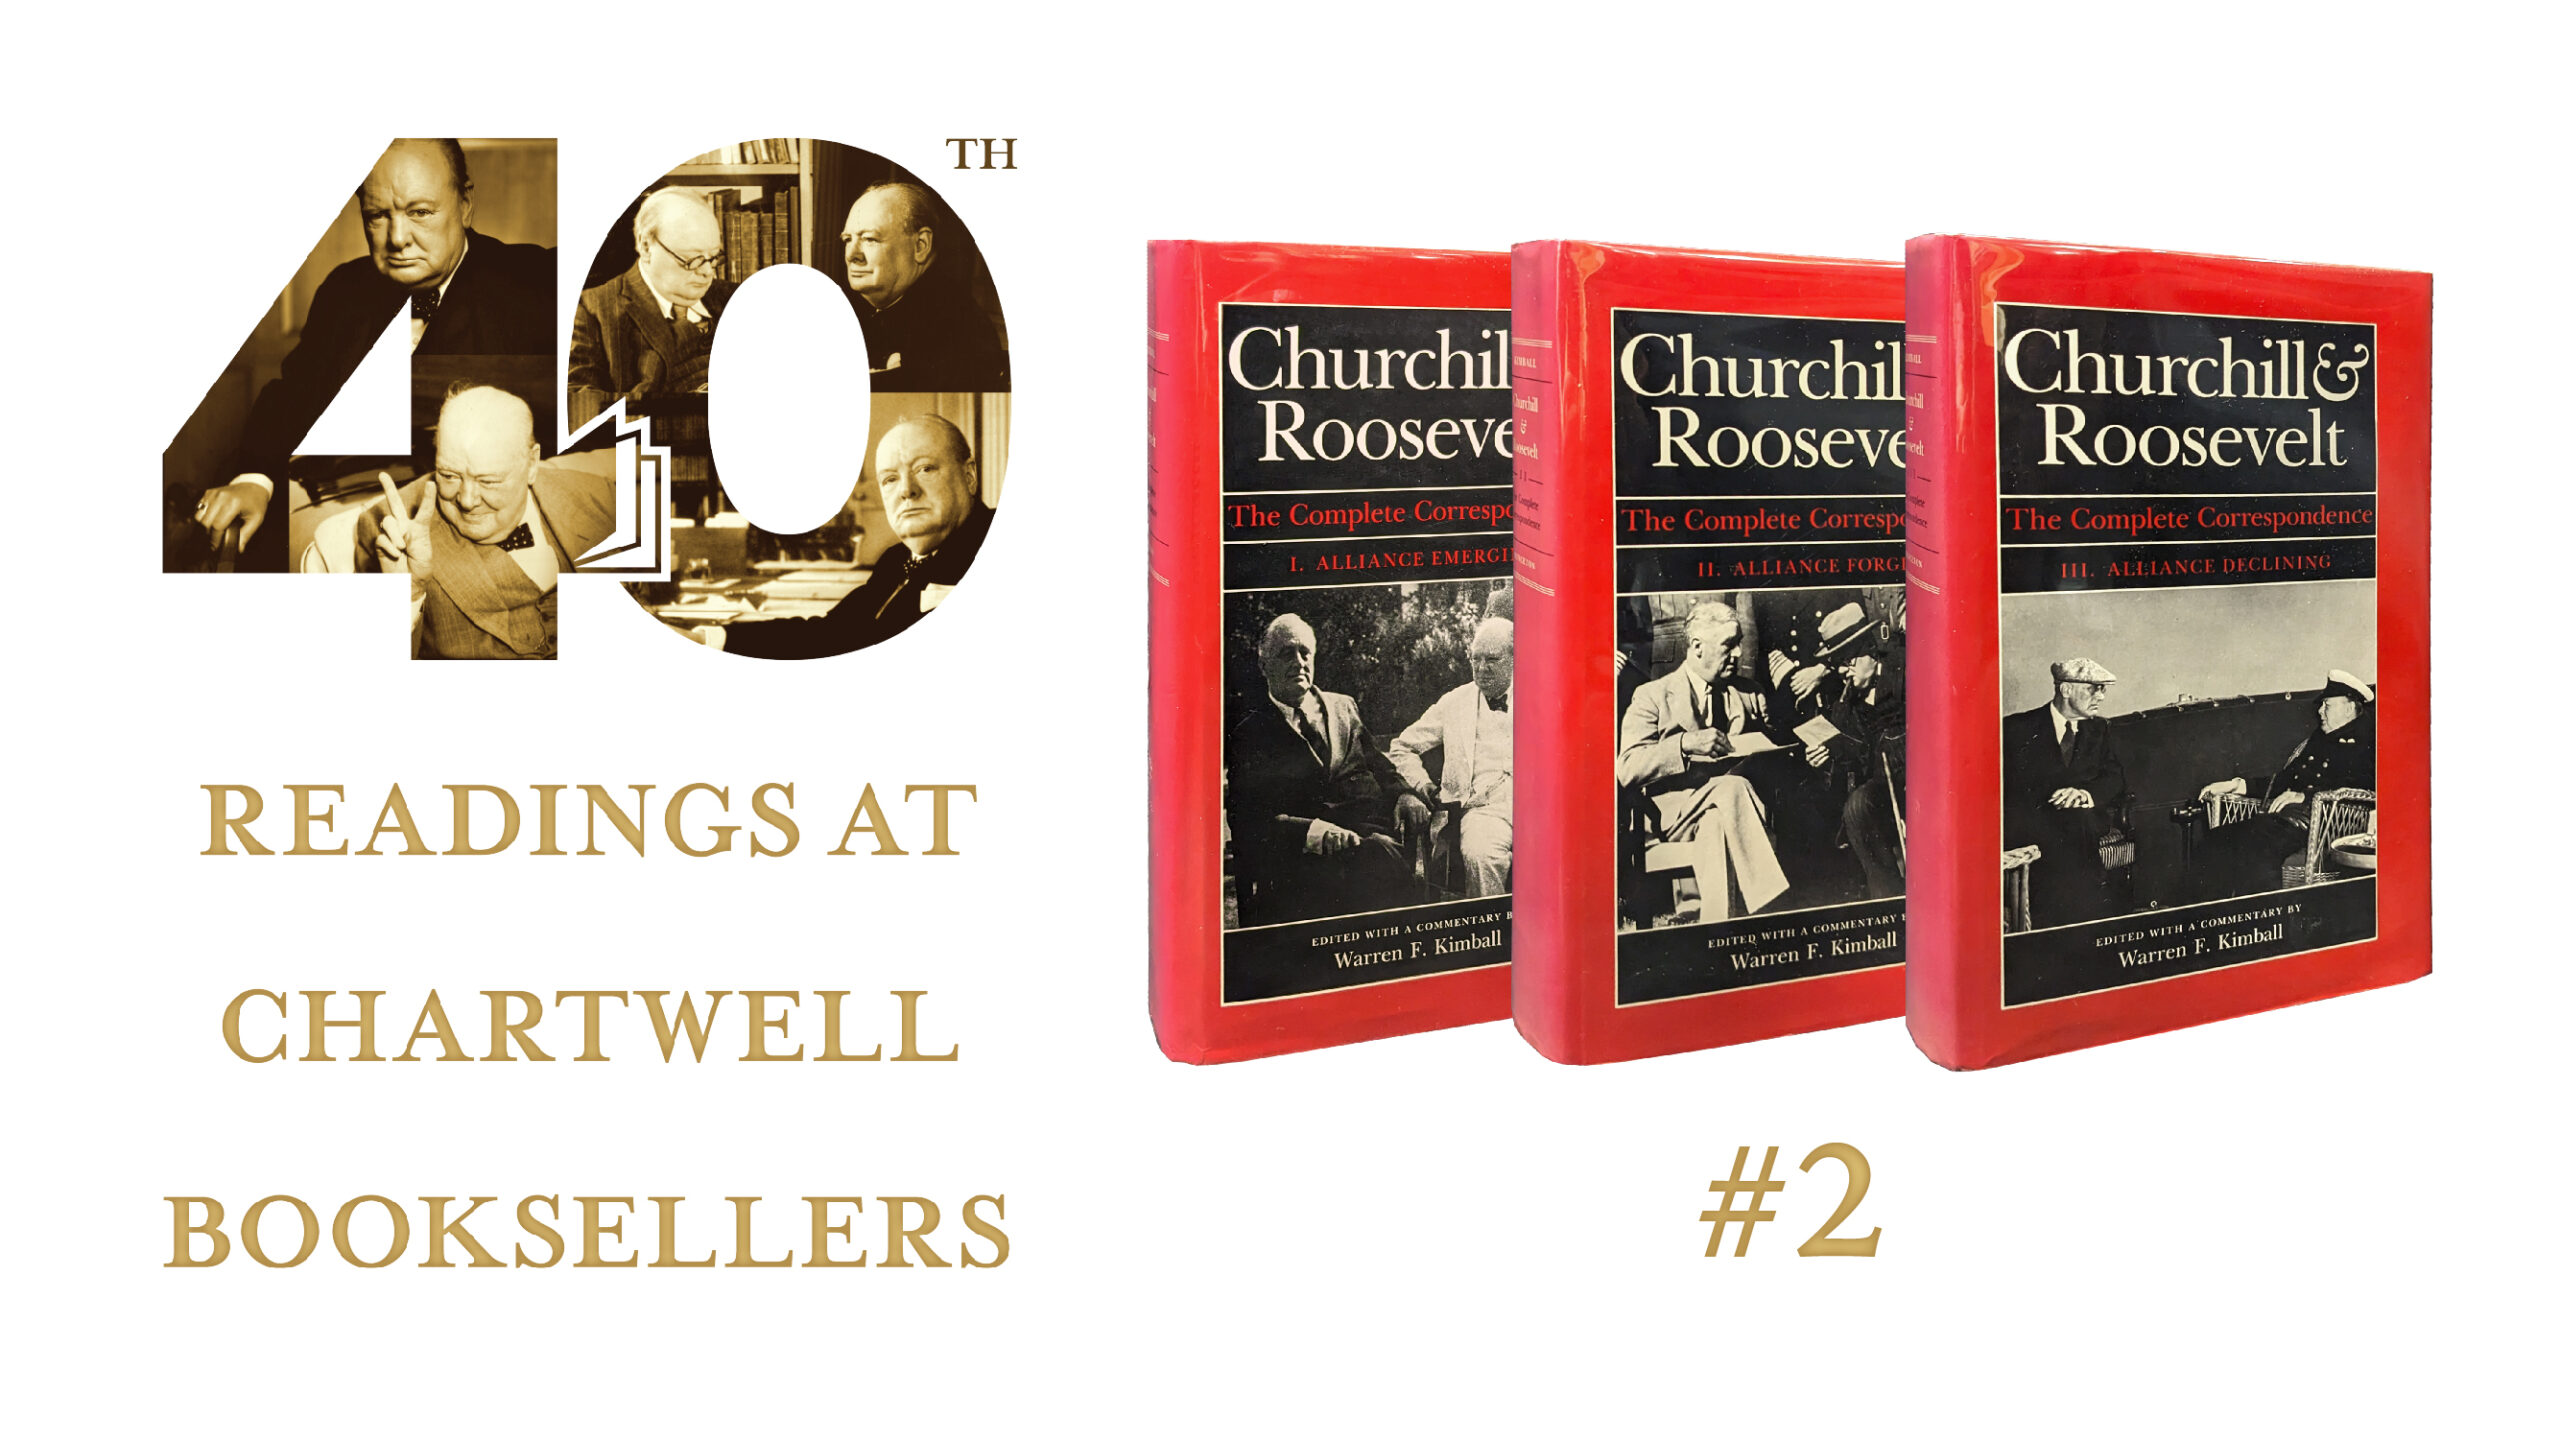 WATCH ‘CHURCHILL & ROOSEVELT: THE COMPLETE CORRESPONDENCE’ READ BY EDITOR WARREN KIMBALL